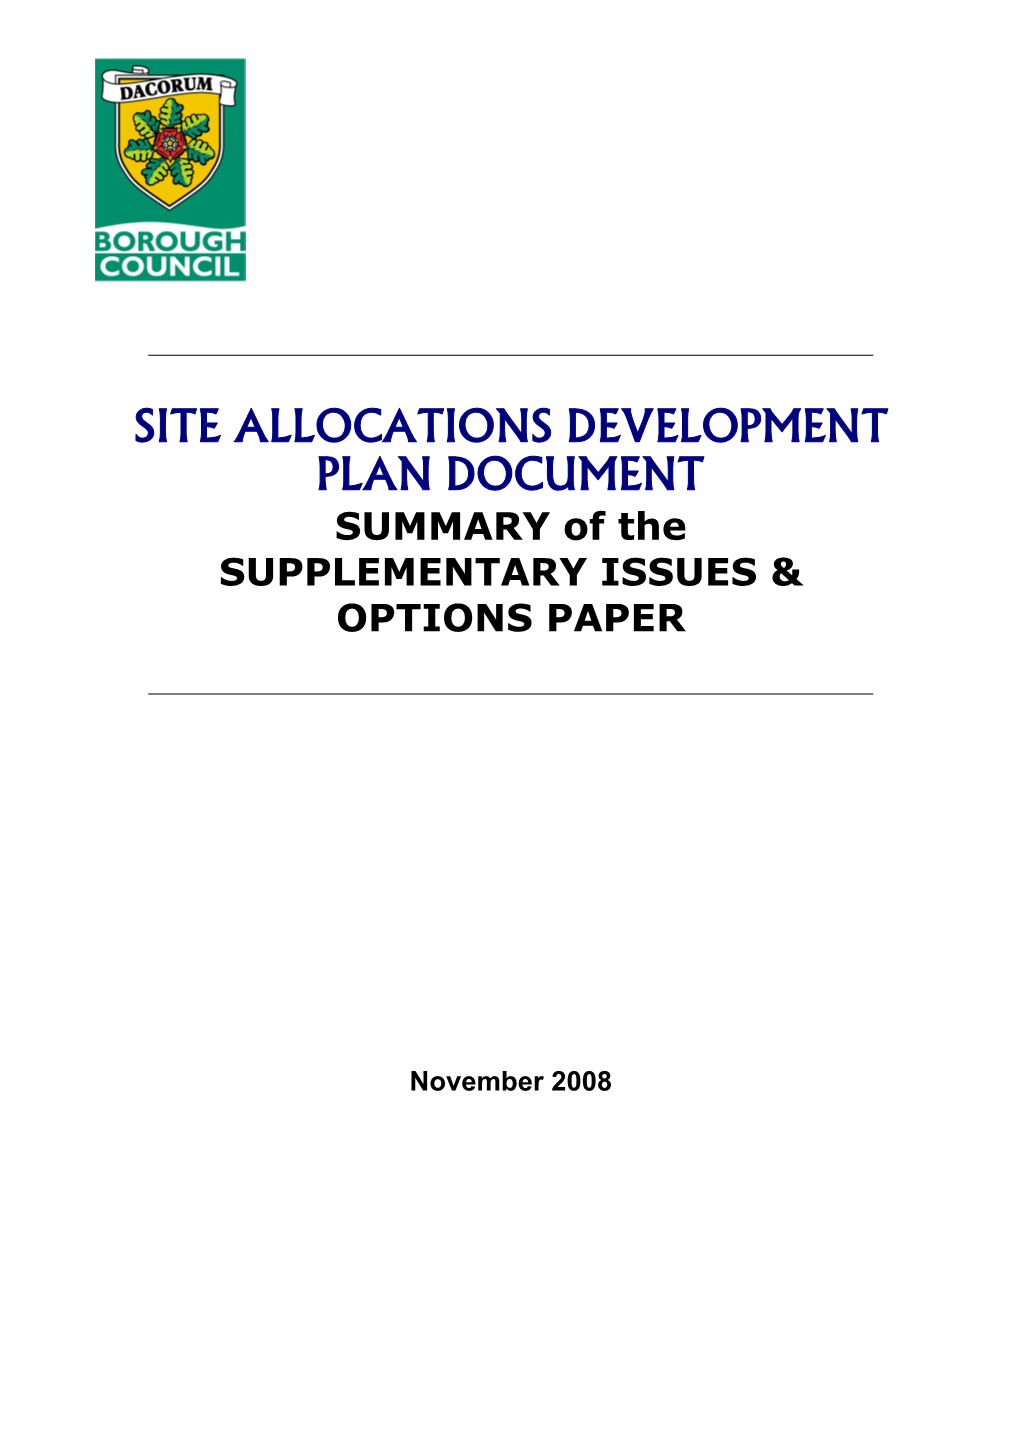 SITE ALLOCATIONS DEVELOPMENT PLAN DOCUMENT SUMMARY of the SUPPLEMENTARY ISSUES & OPTIONS PAPER